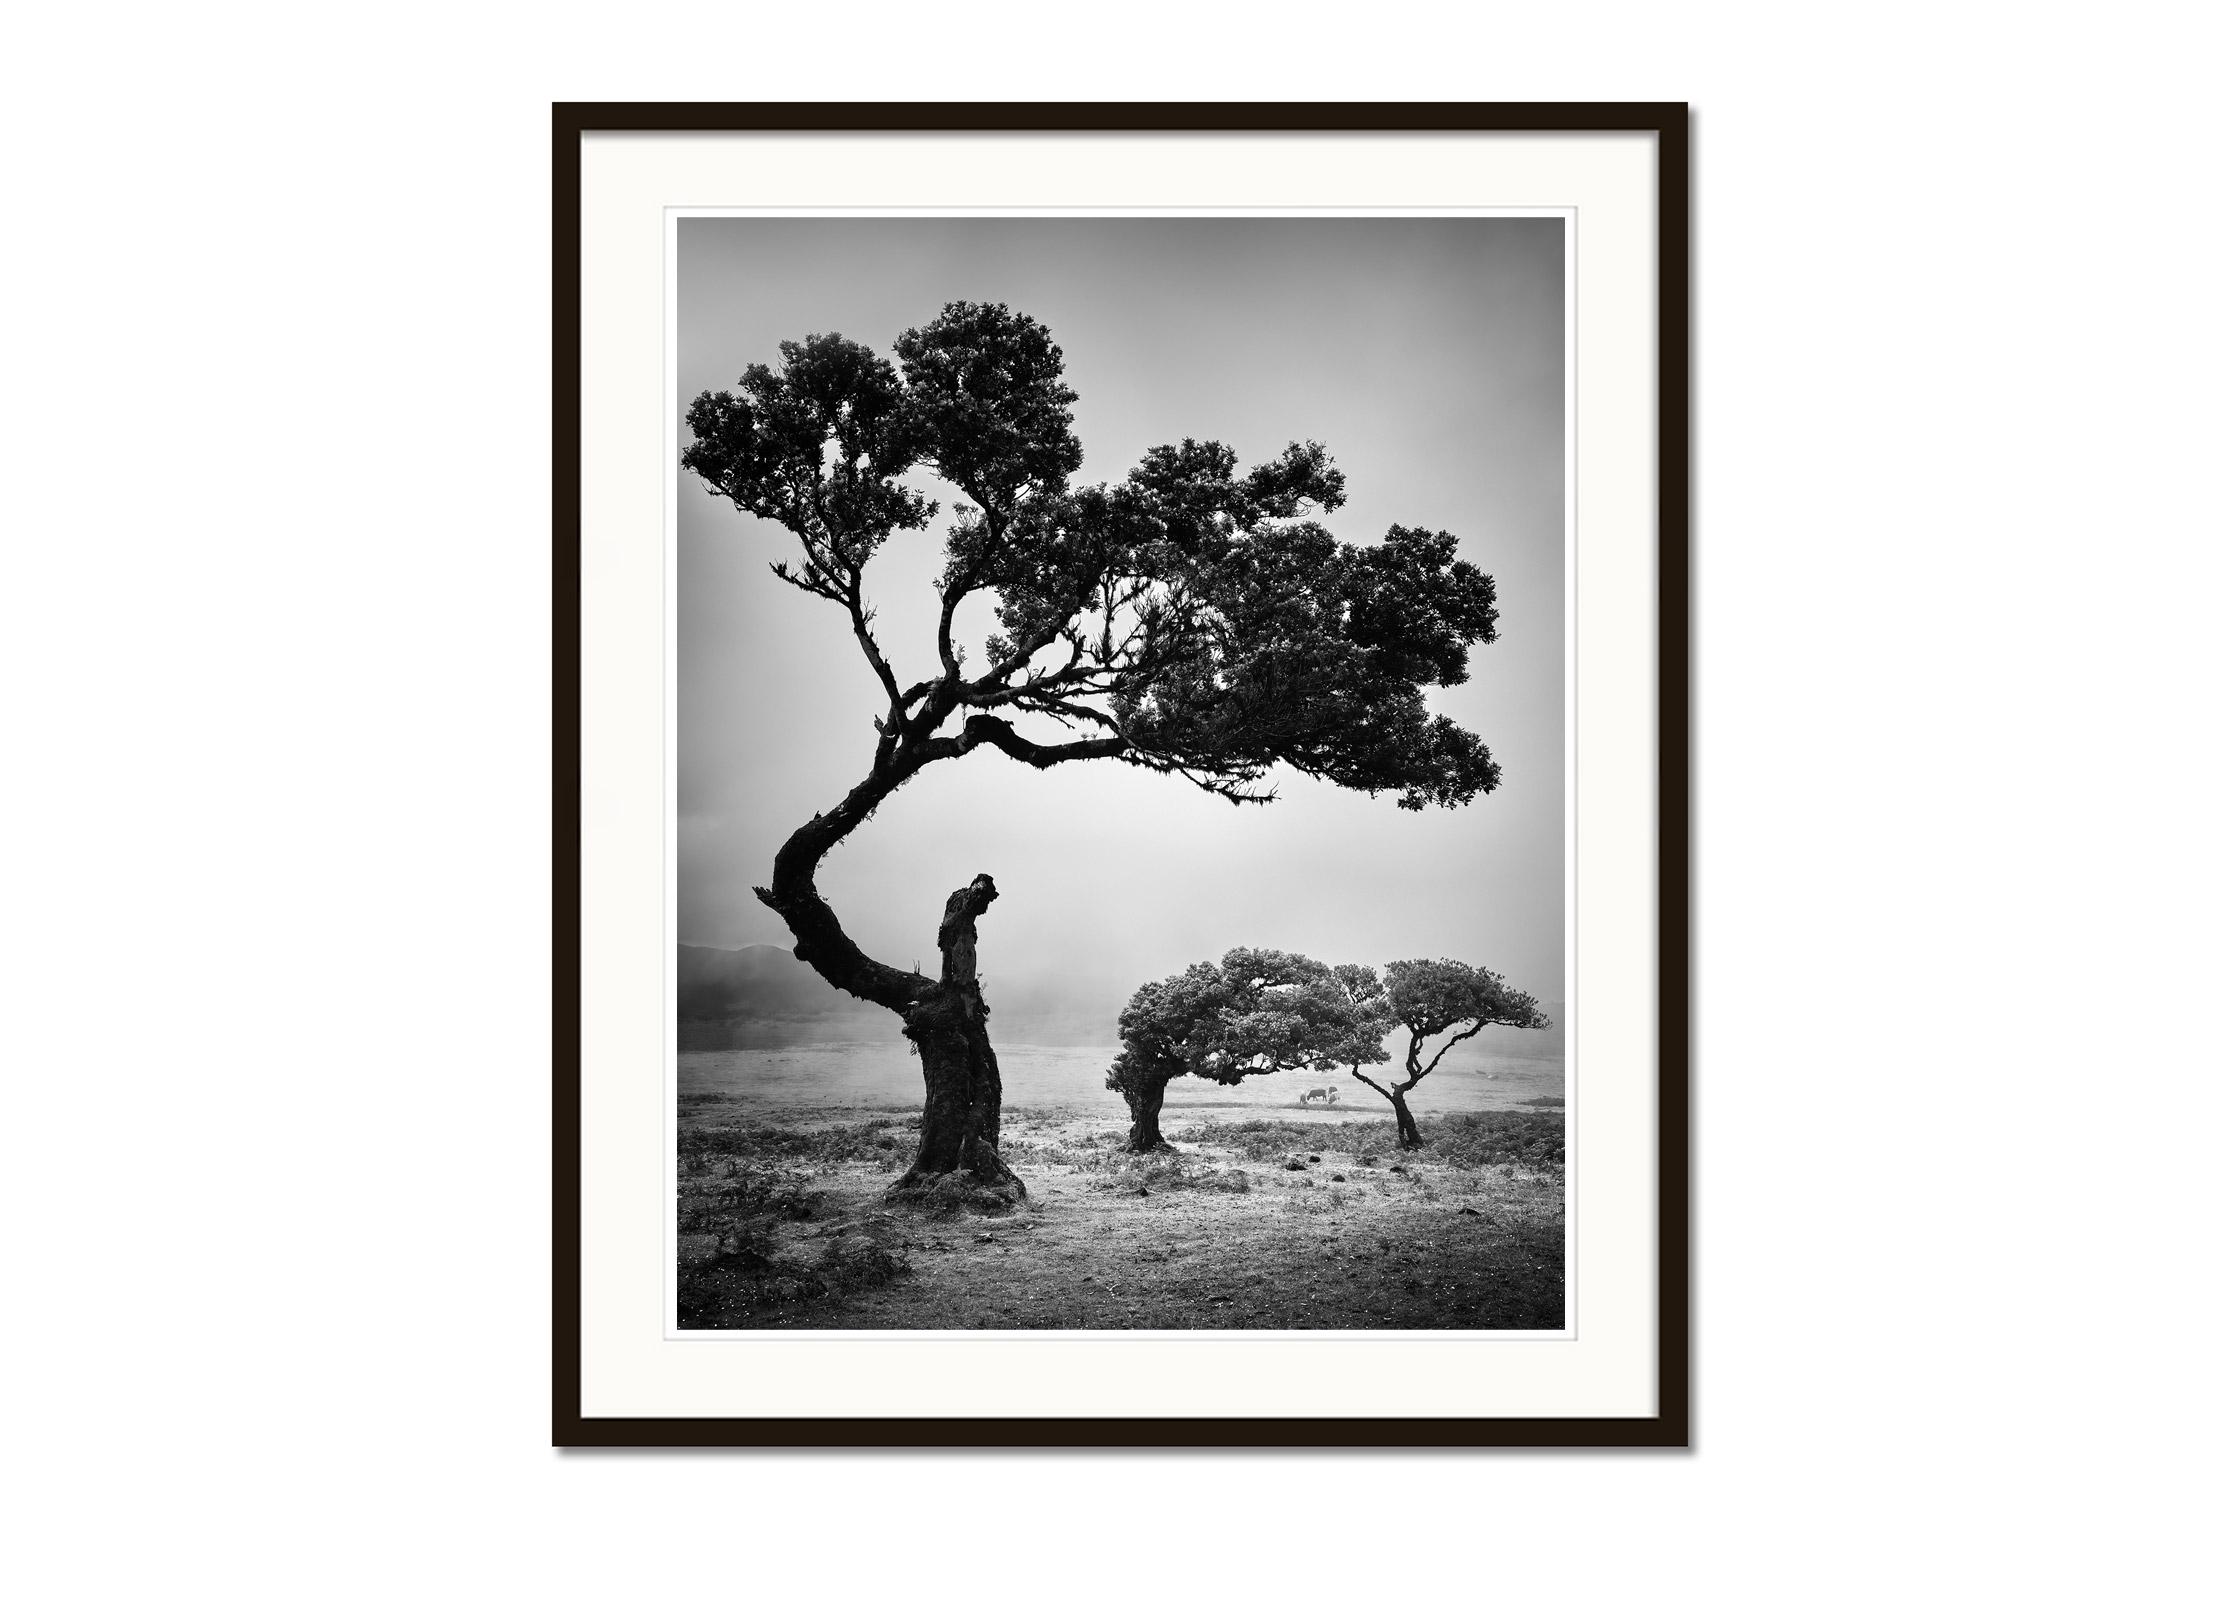 Black and white fine art landscape photography. Mystical forest with bent trees and cows in fog, Fanal, Madeira, Portugal. Archival pigment ink print, edition of 7. Signed, titled, dated and numbered by artist. Certificate of authenticity included.